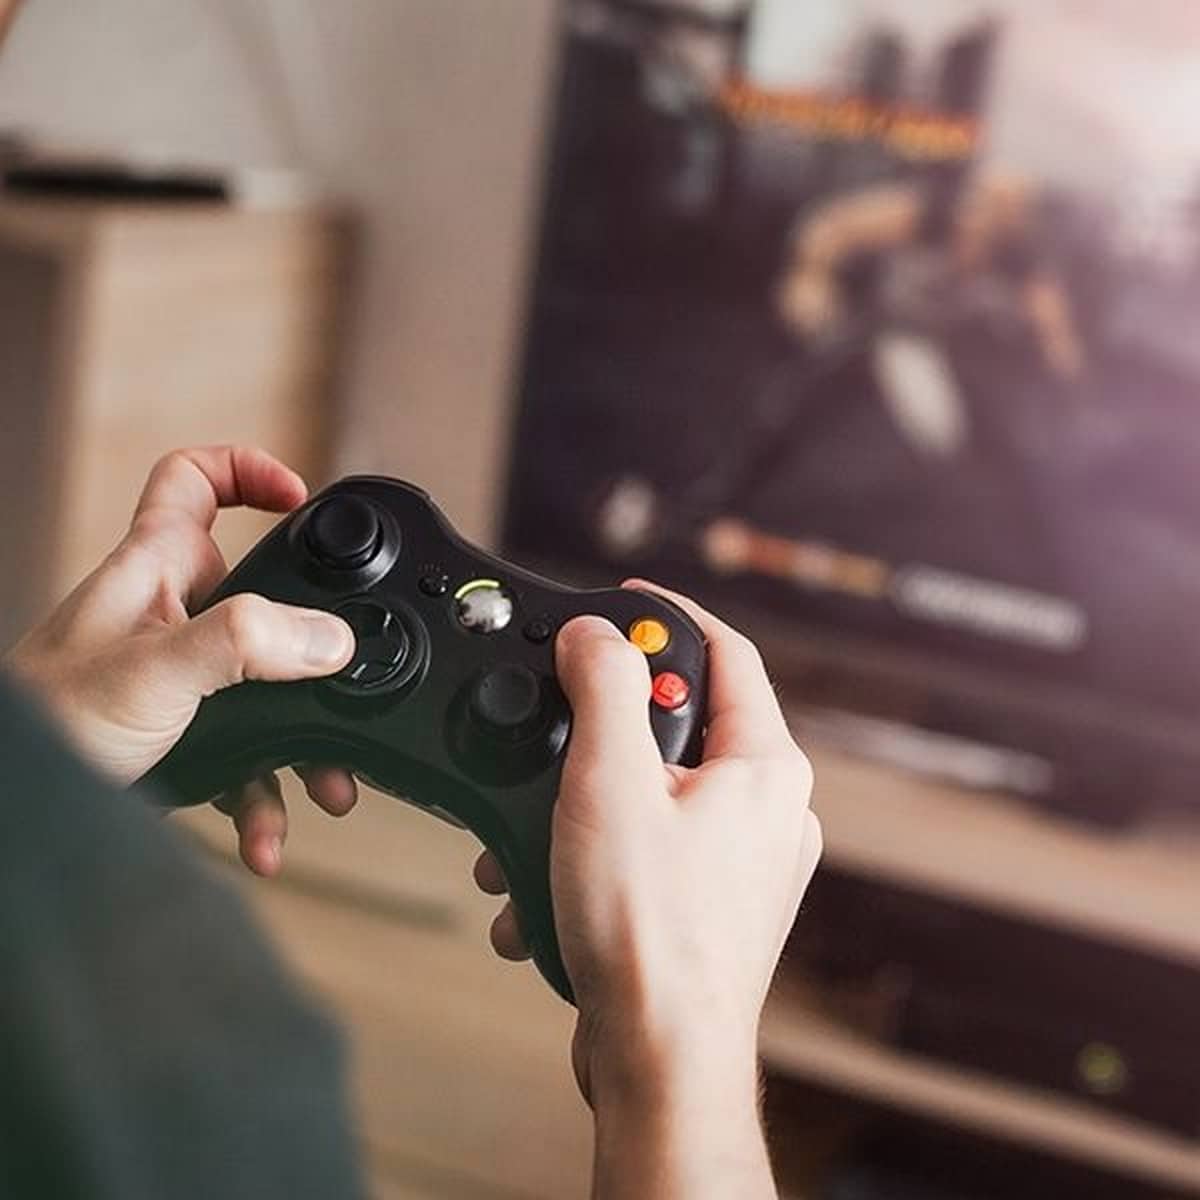 Image of a person playing a video game